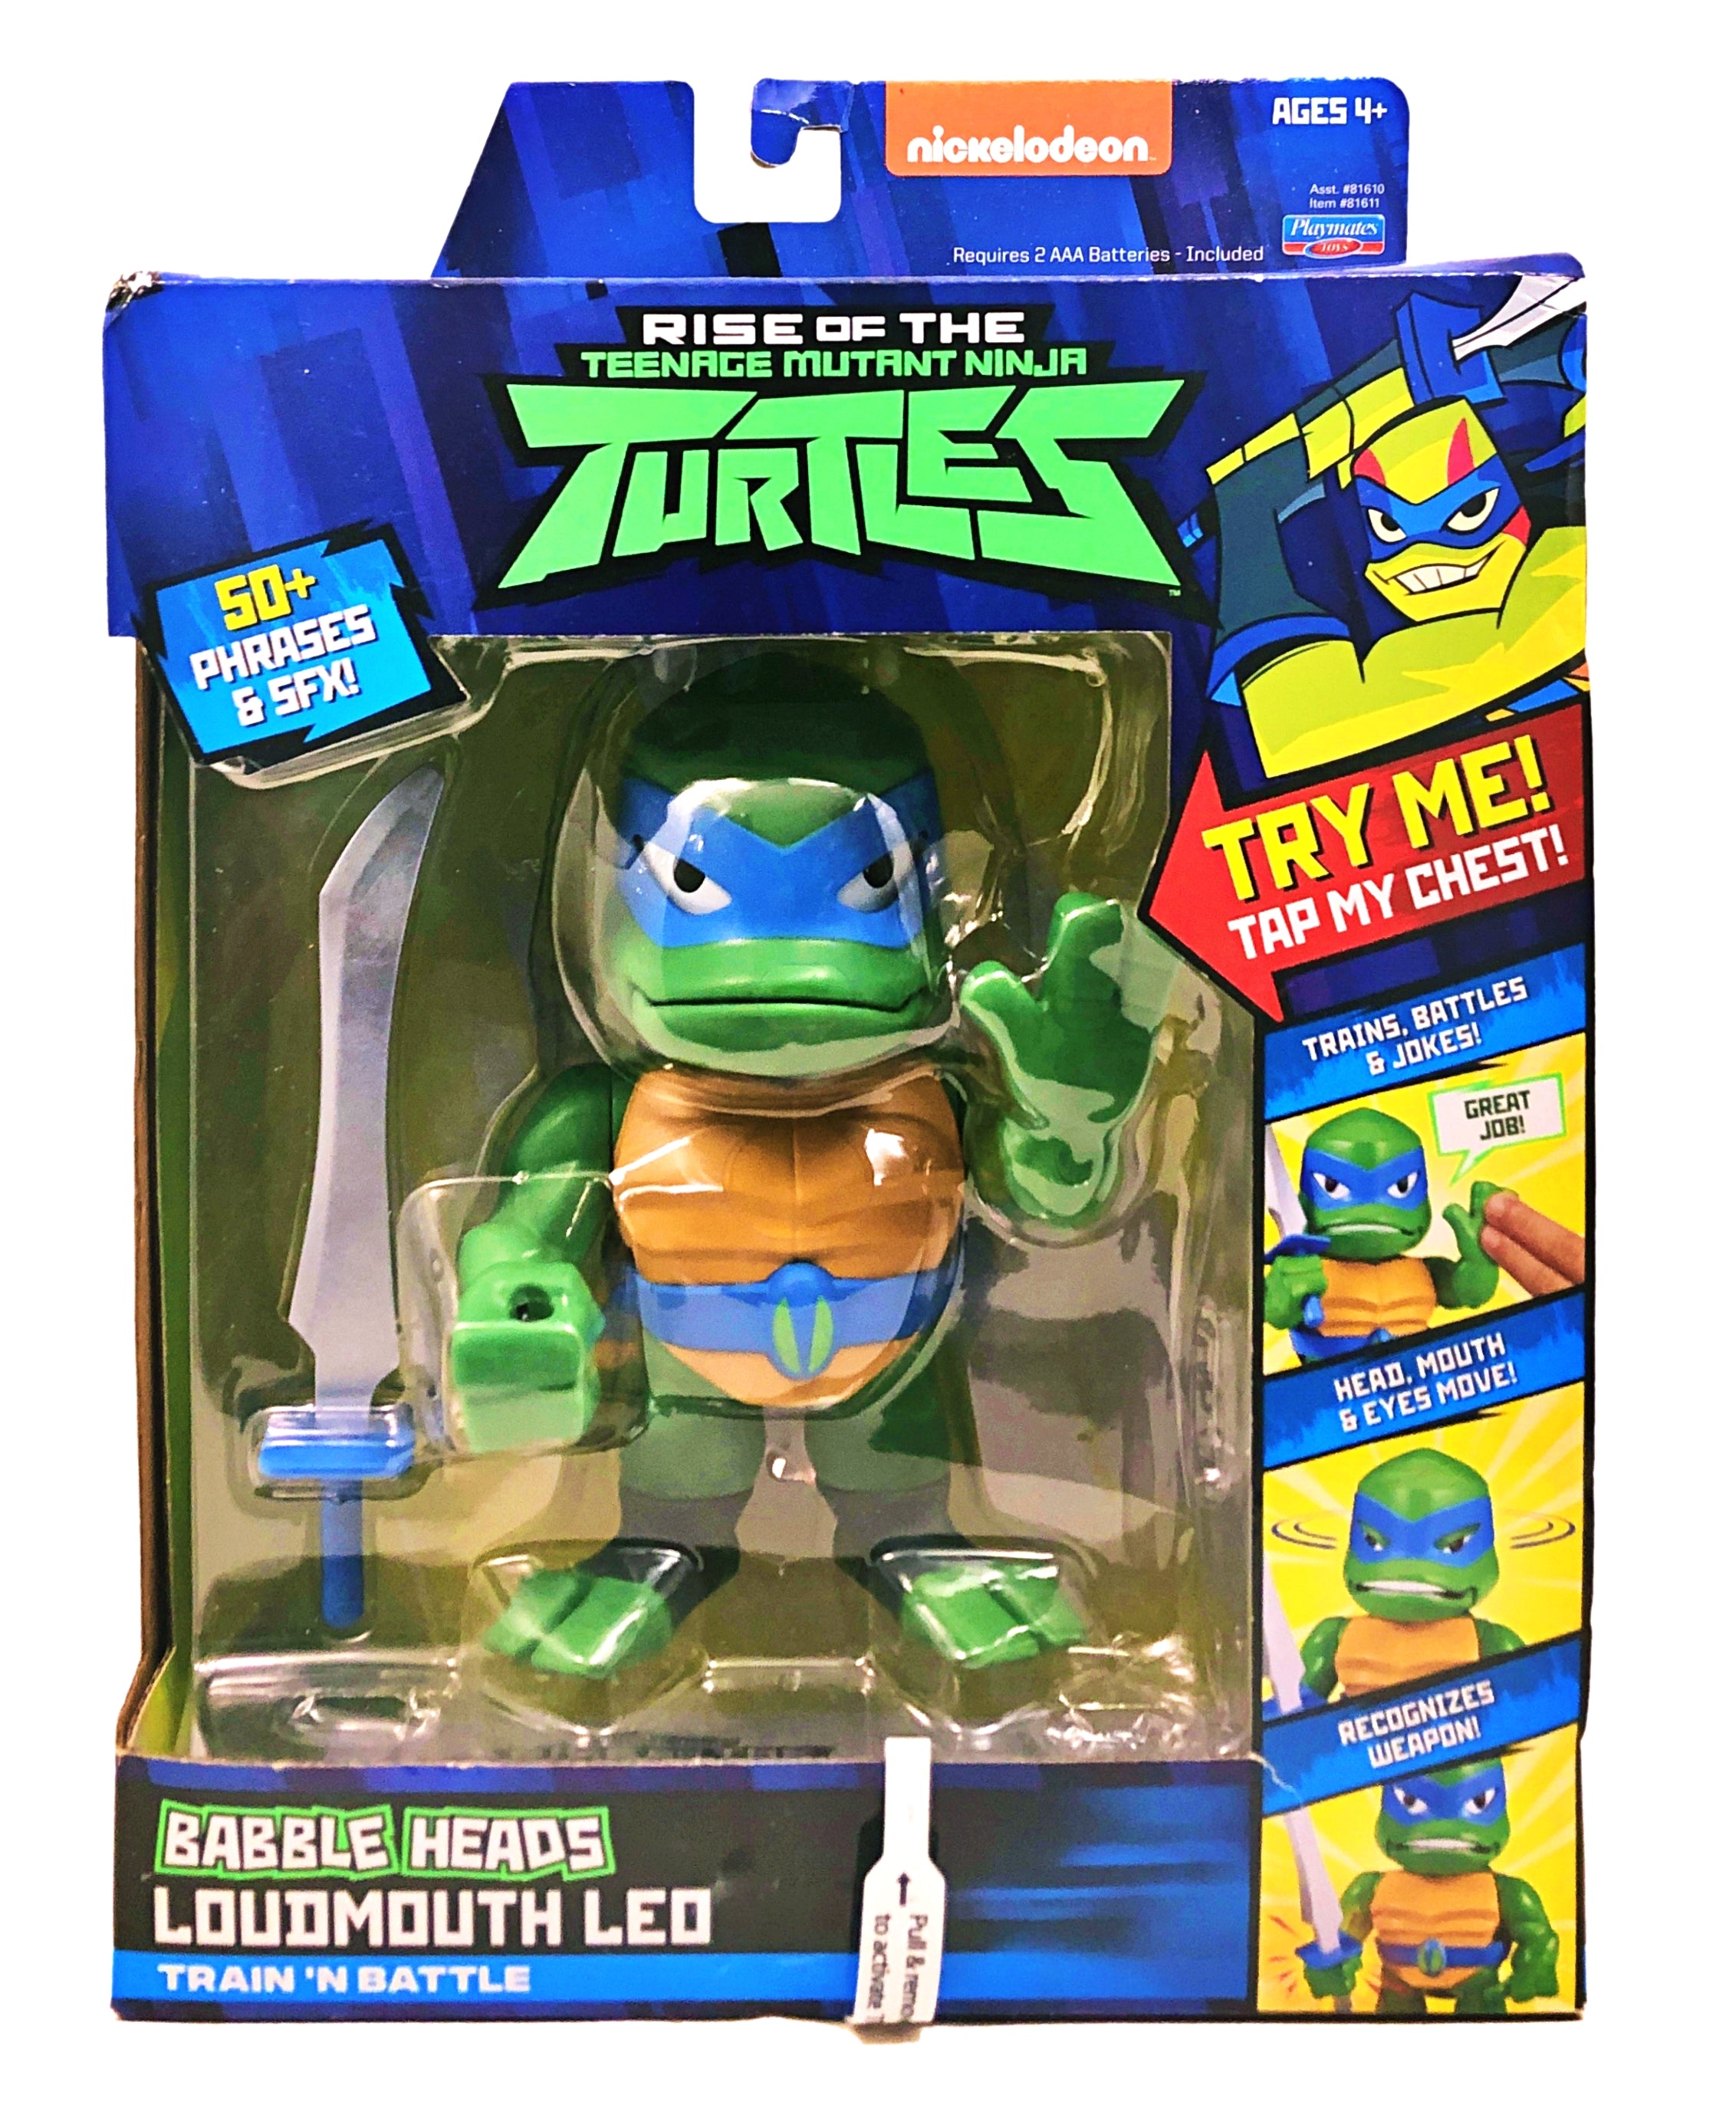 Rise of the TMNT's Babble Heads Loudmouth Leo (Playmates)